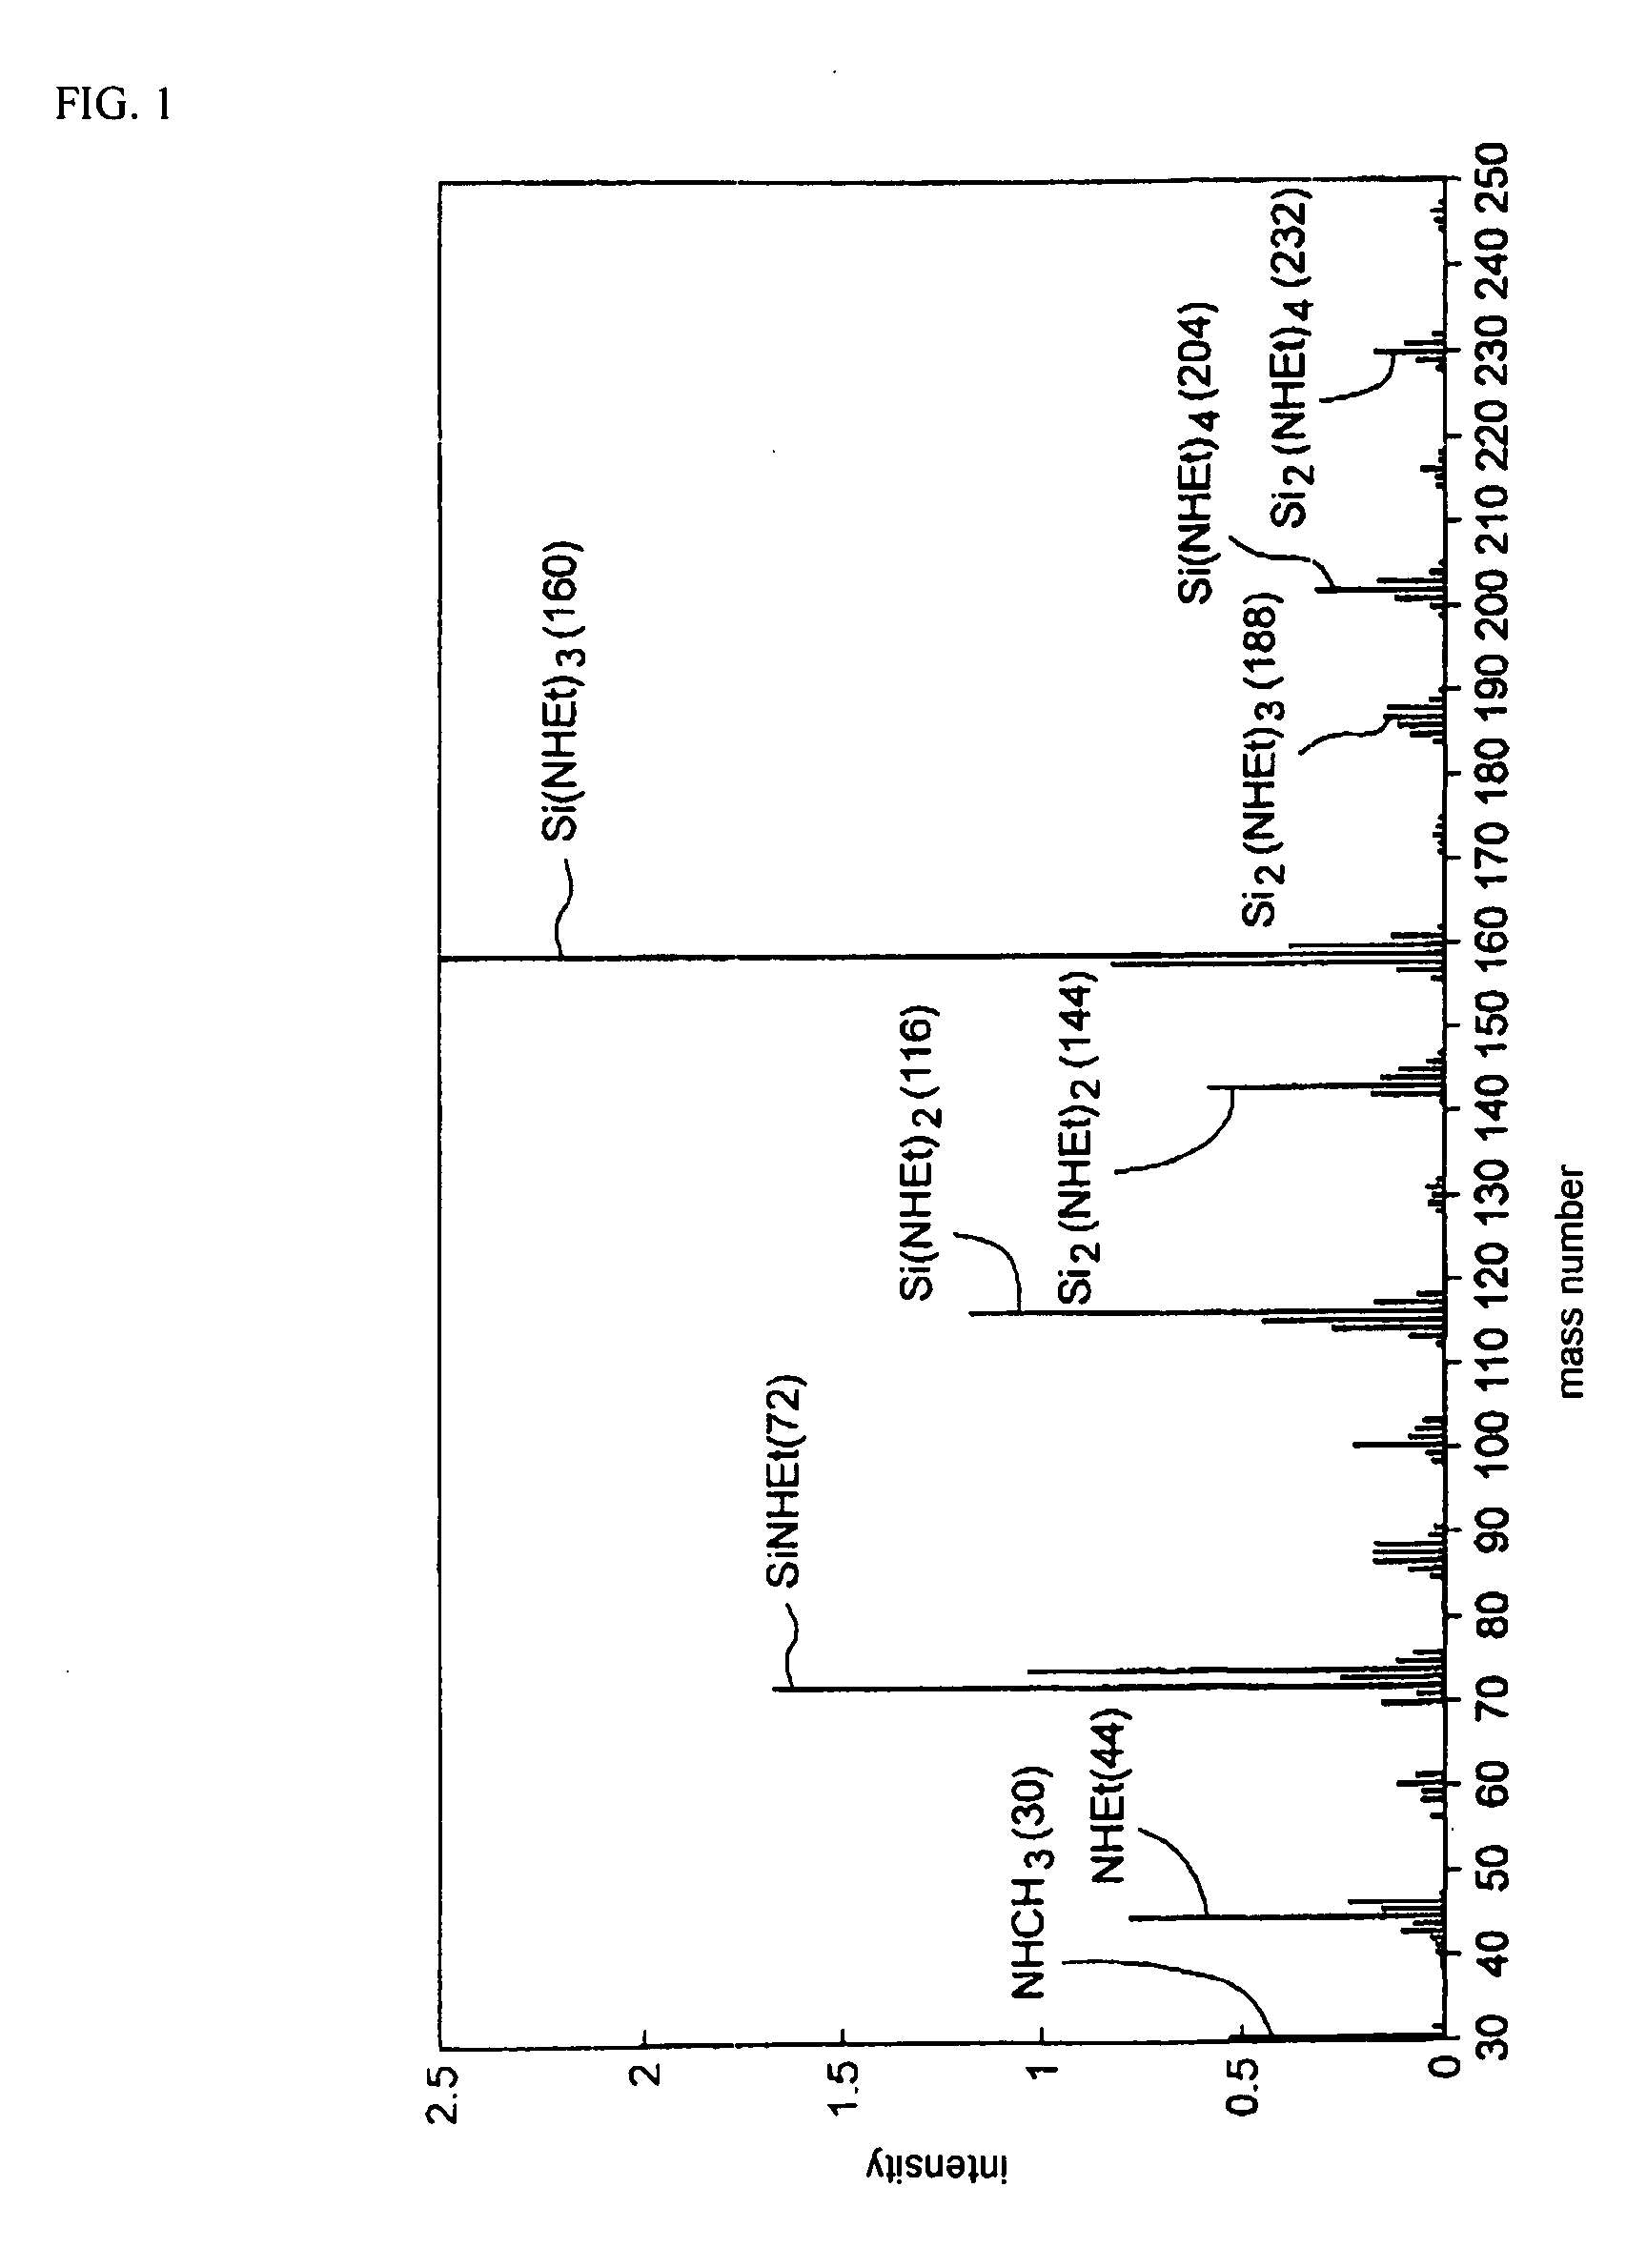 Hexakis(monohydrocarbylamino)disilanes and method for the preparation thereof